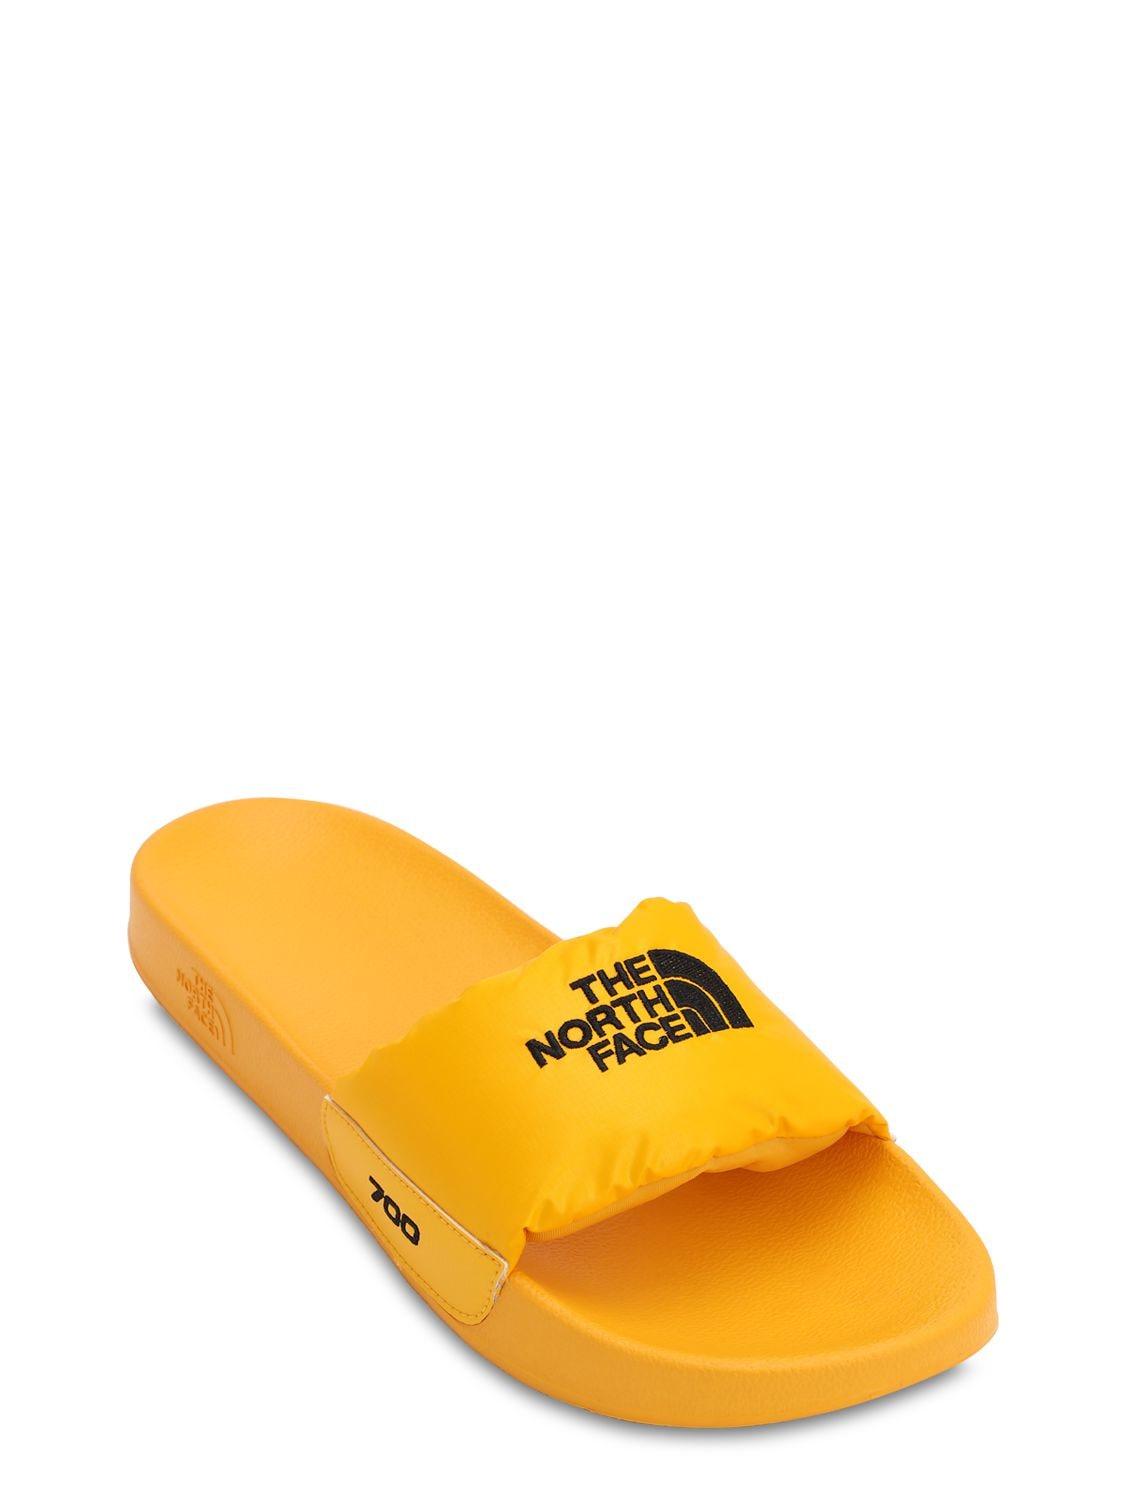 The North Face Nuptse Slide Sandals in Yellow for Men - Lyst